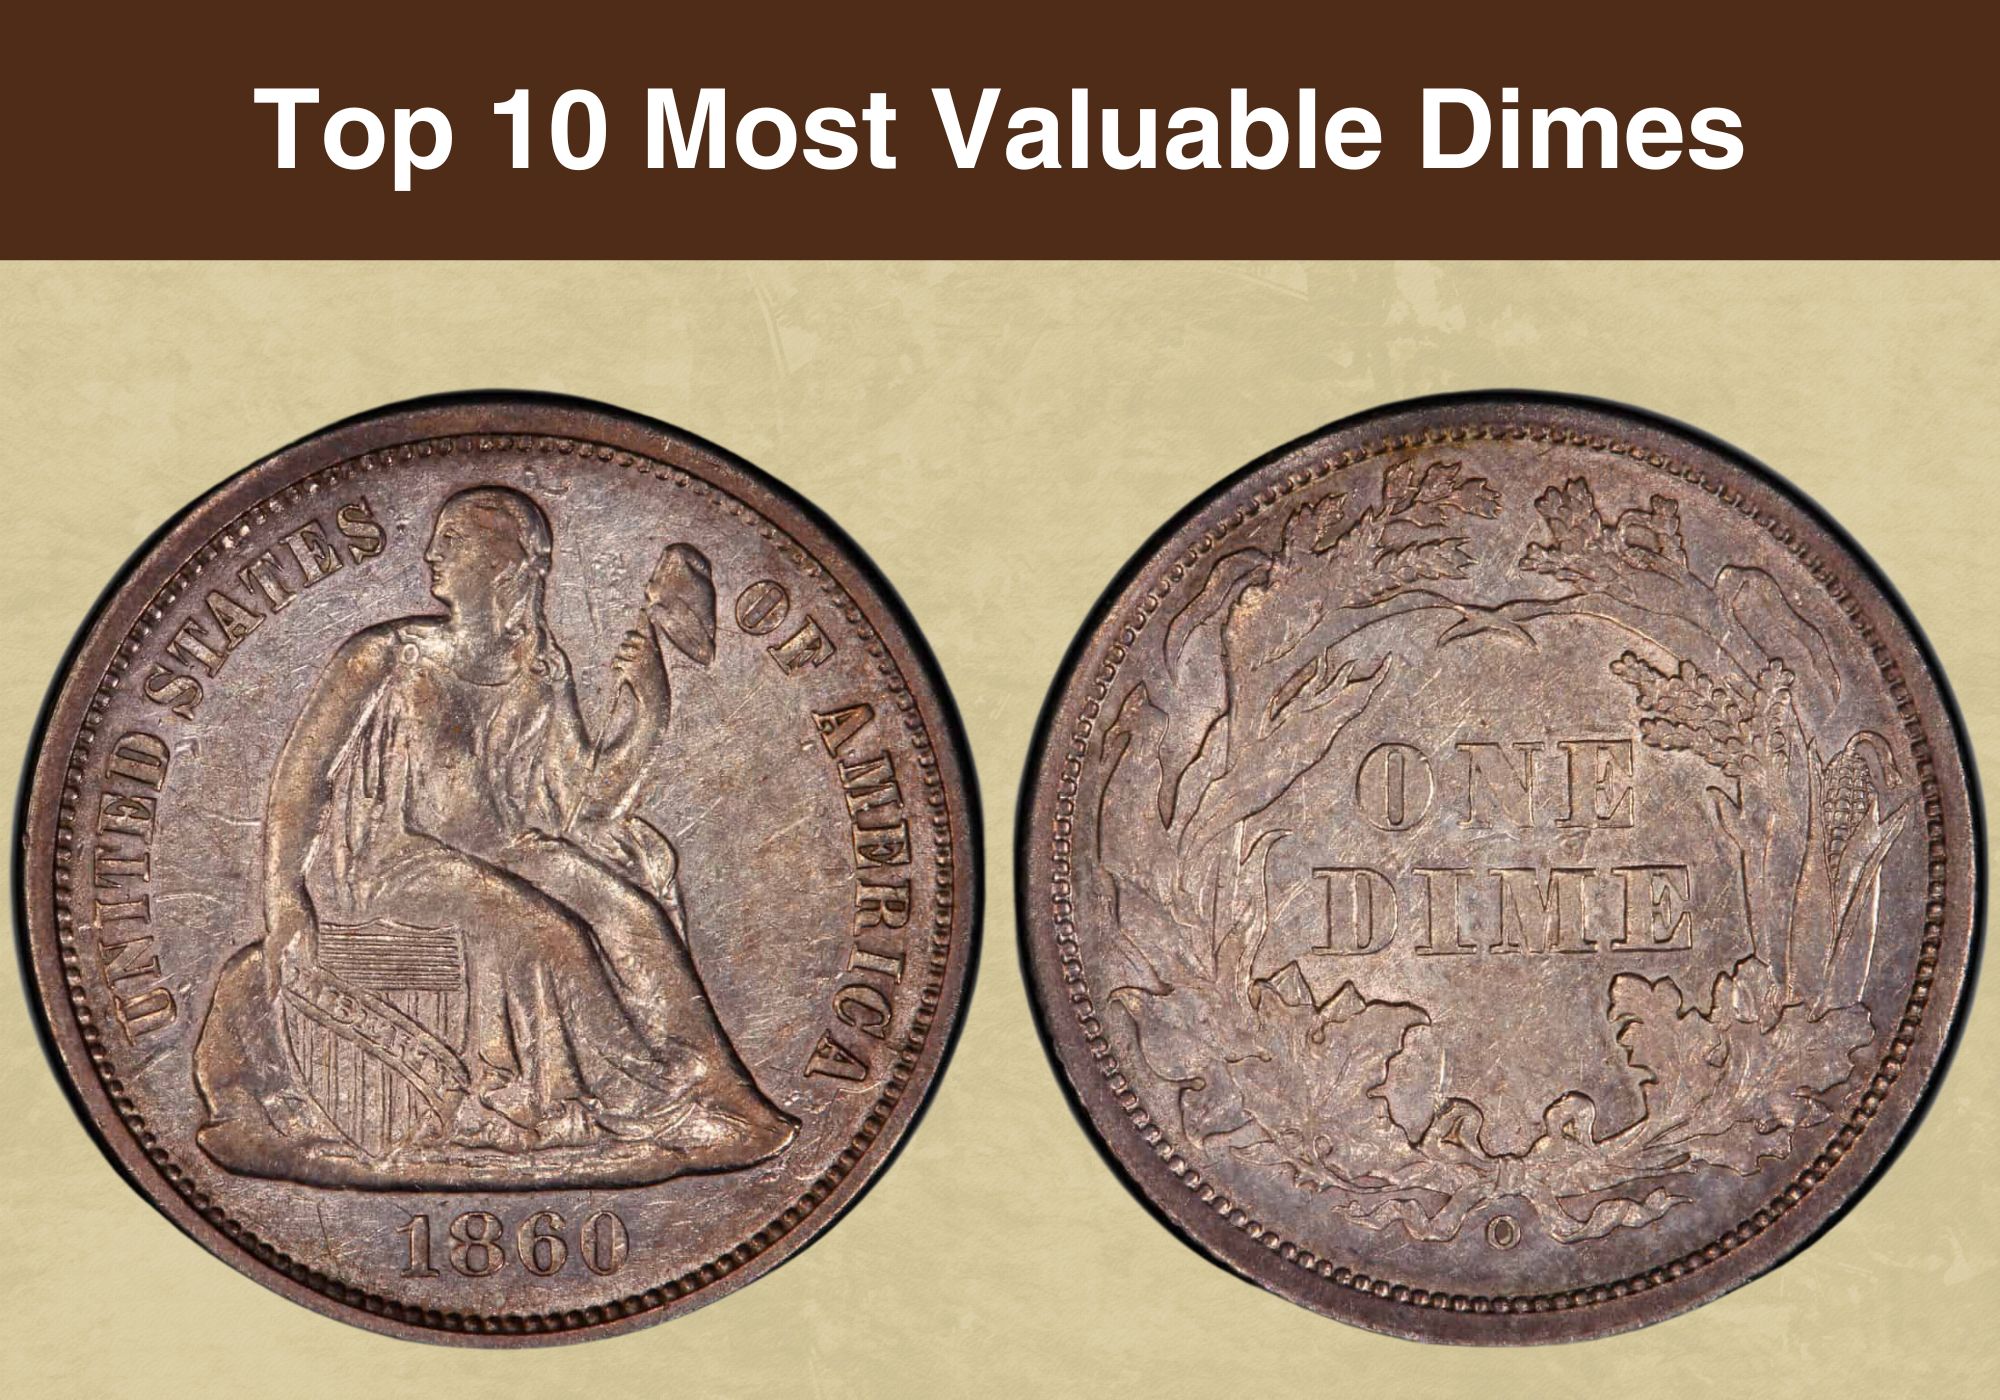 Top 10 Most Valuable Dimes